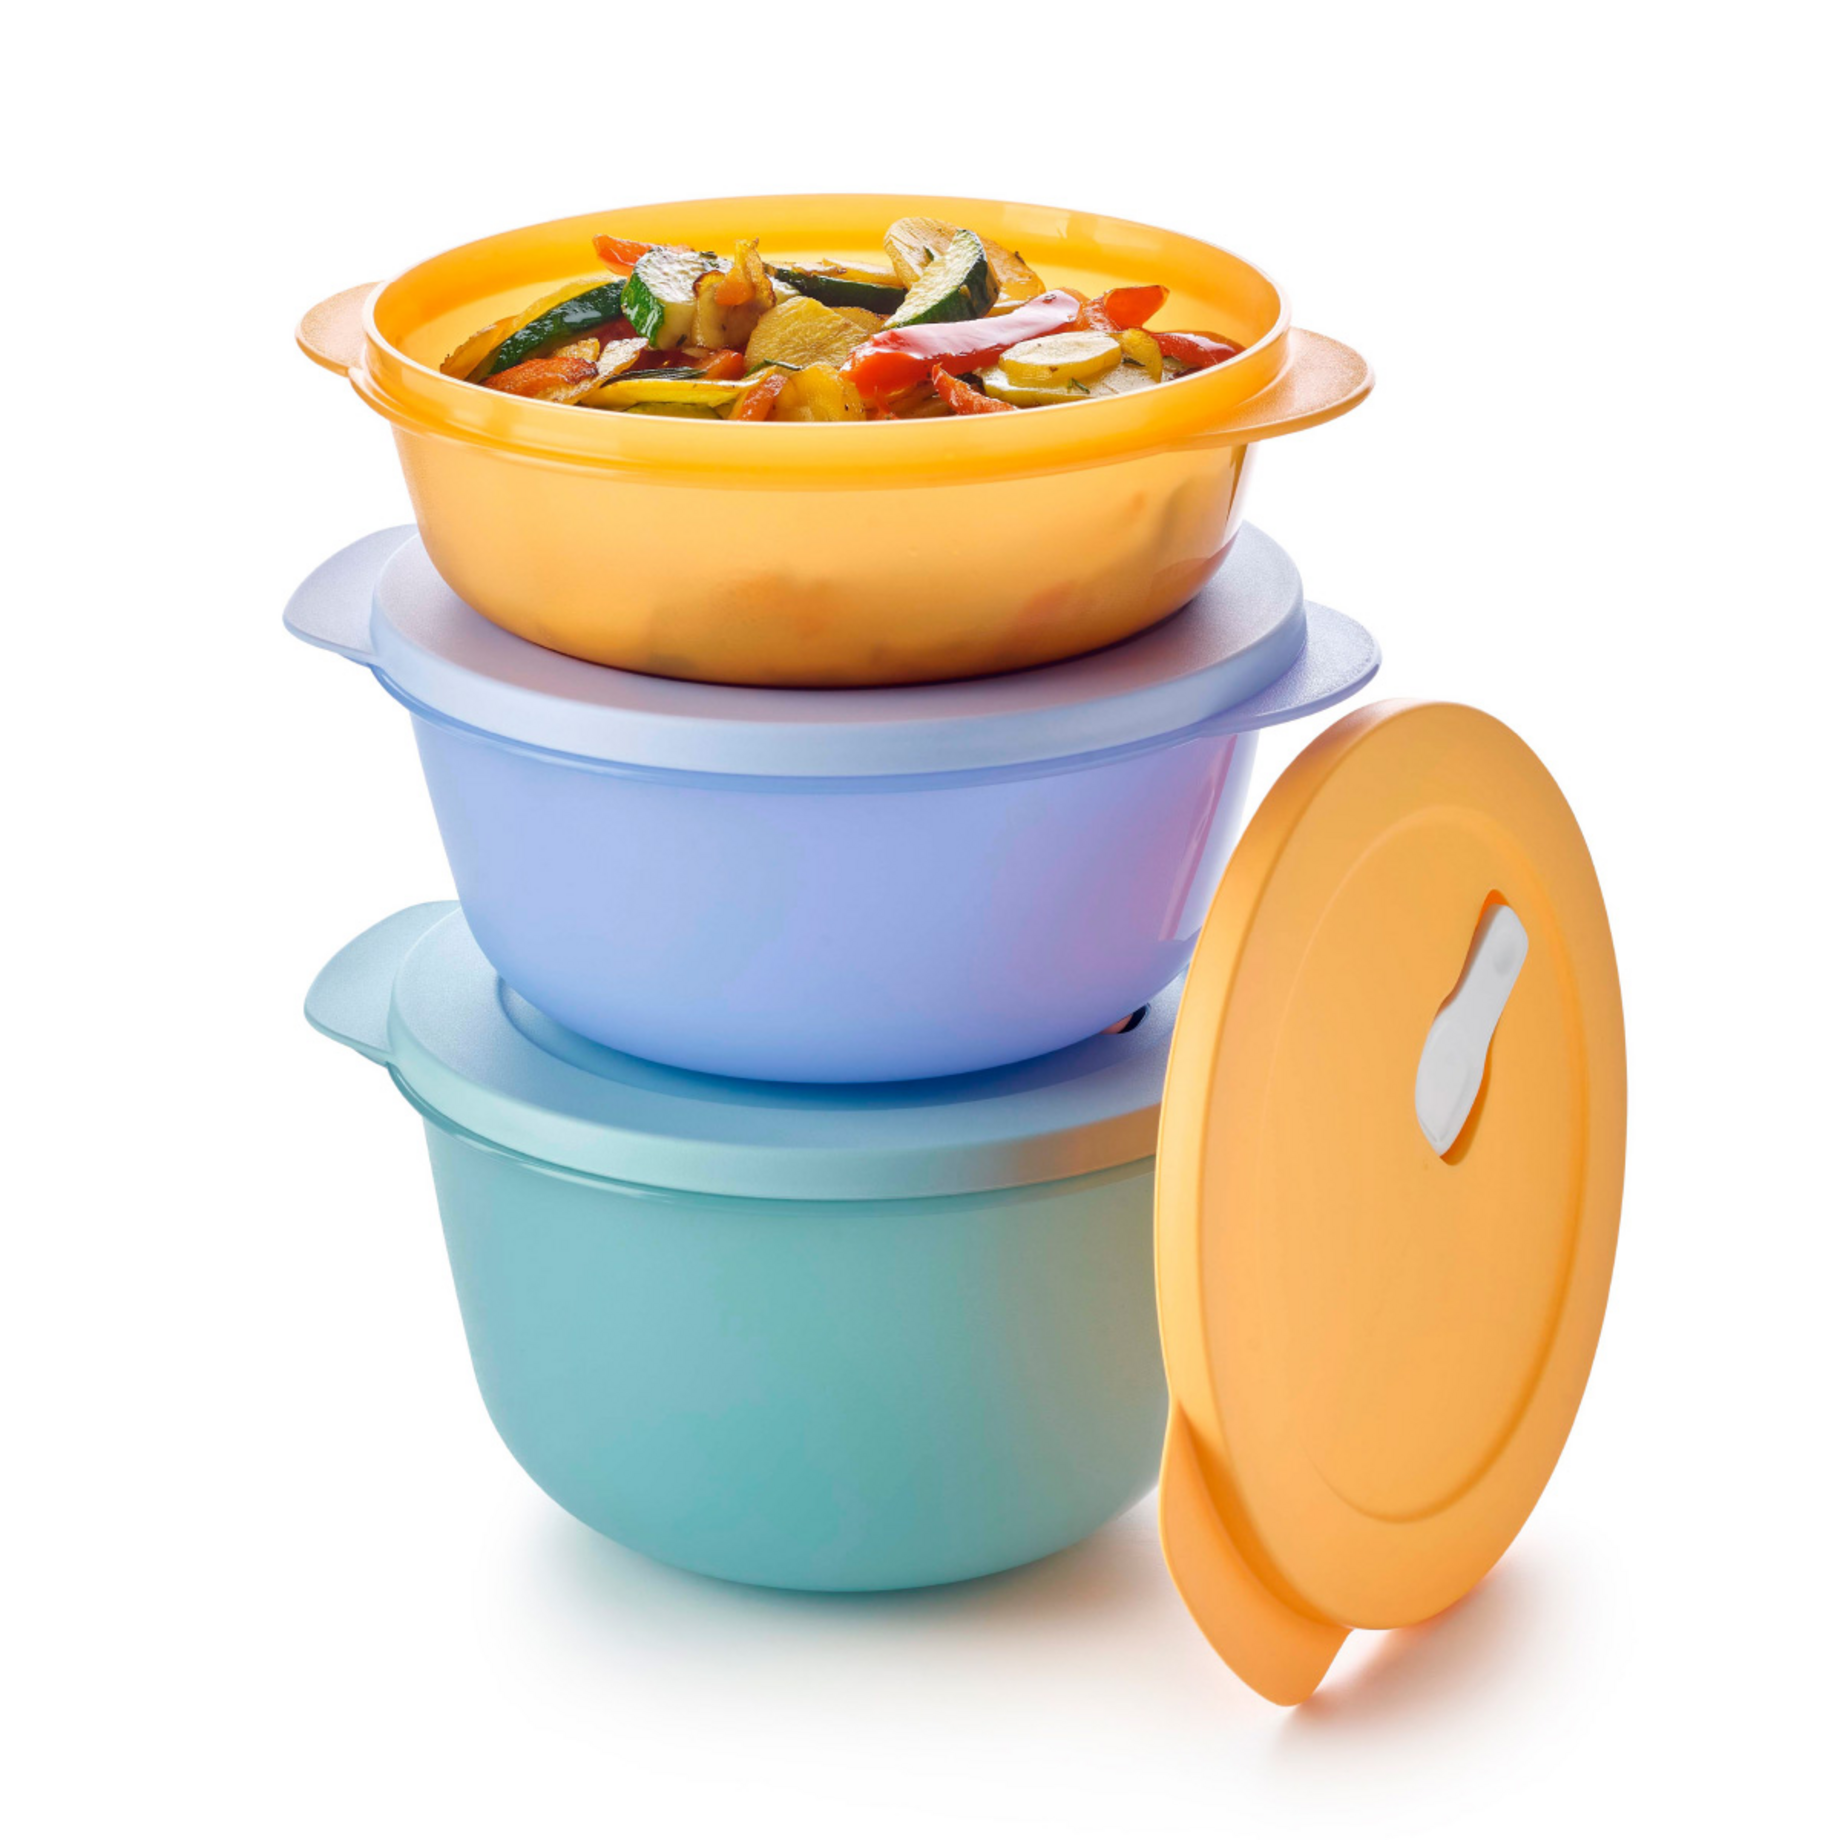 https://appng.tupperware.eu/service/appng/tupperware-products/rest/autoCrop/518826/1840/x